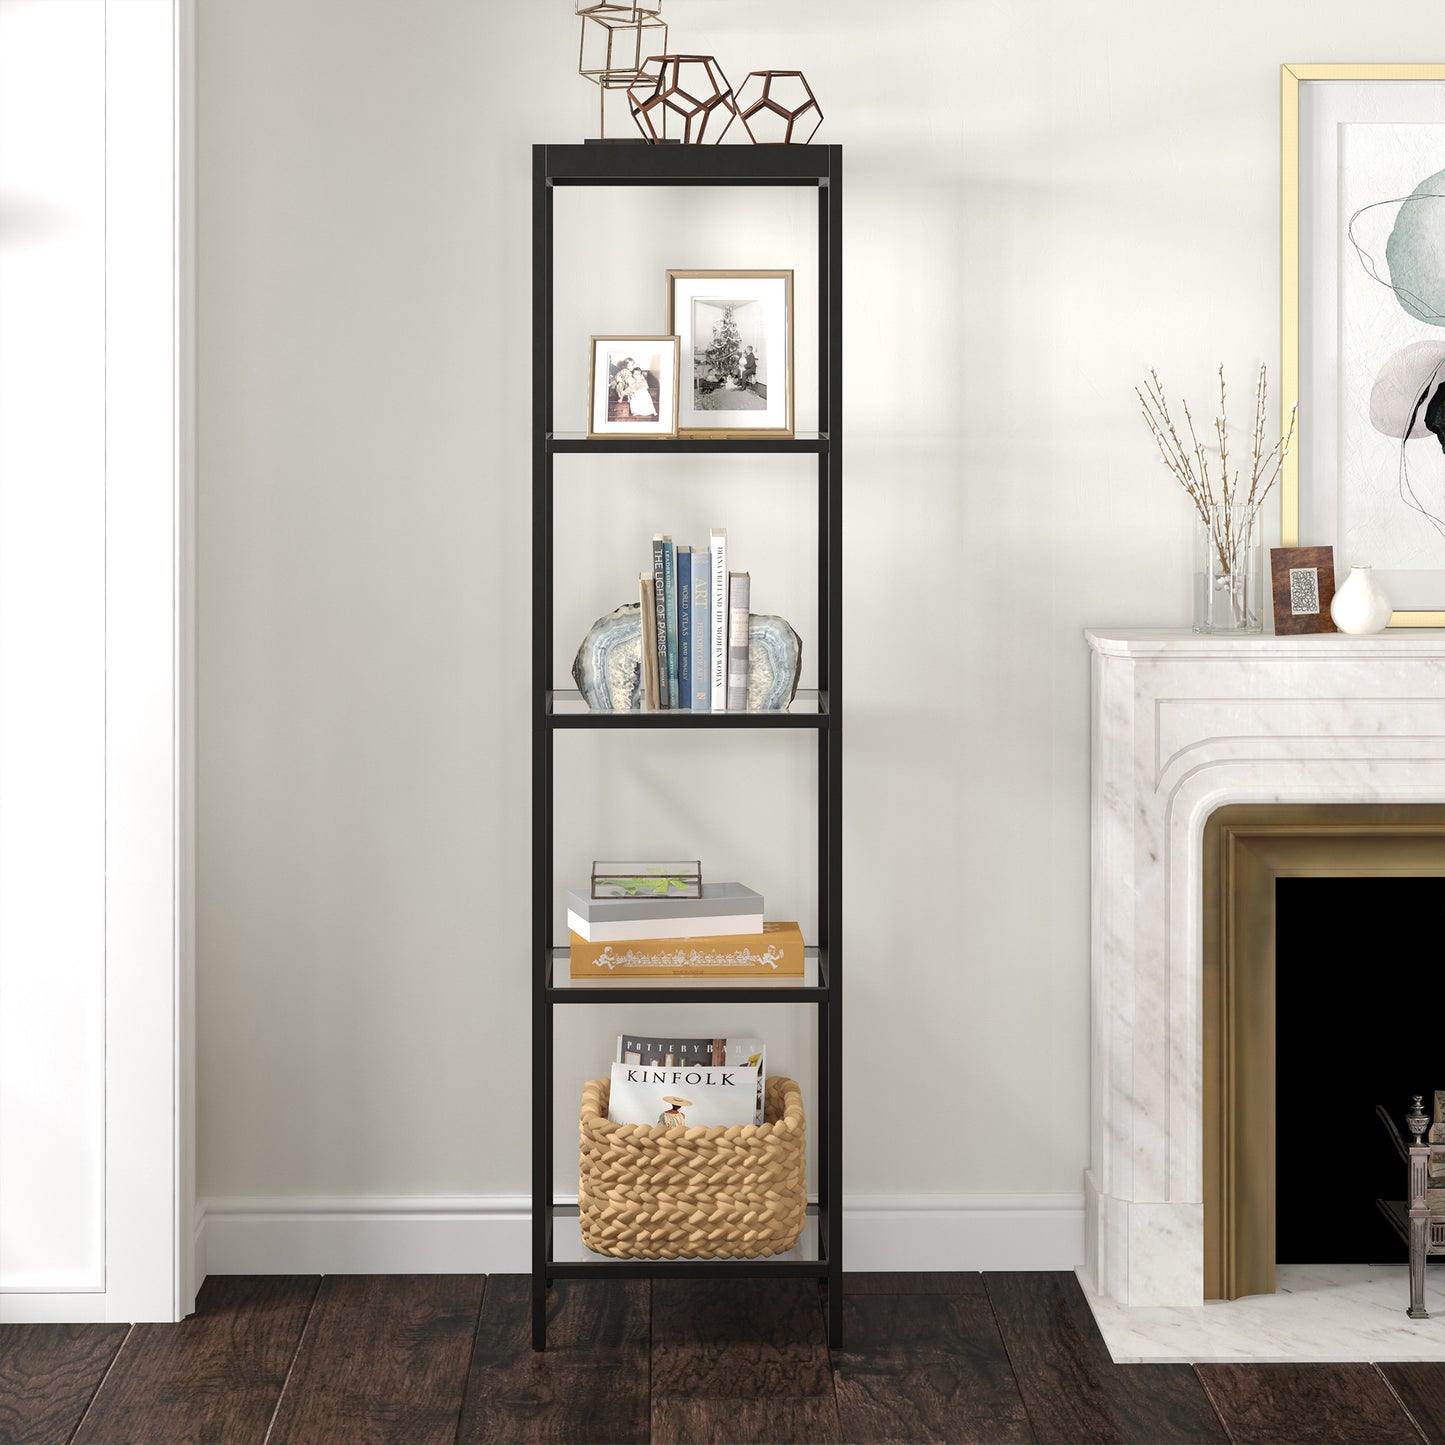 70" Black Metal And Glass Four Tier Standard Bookcase